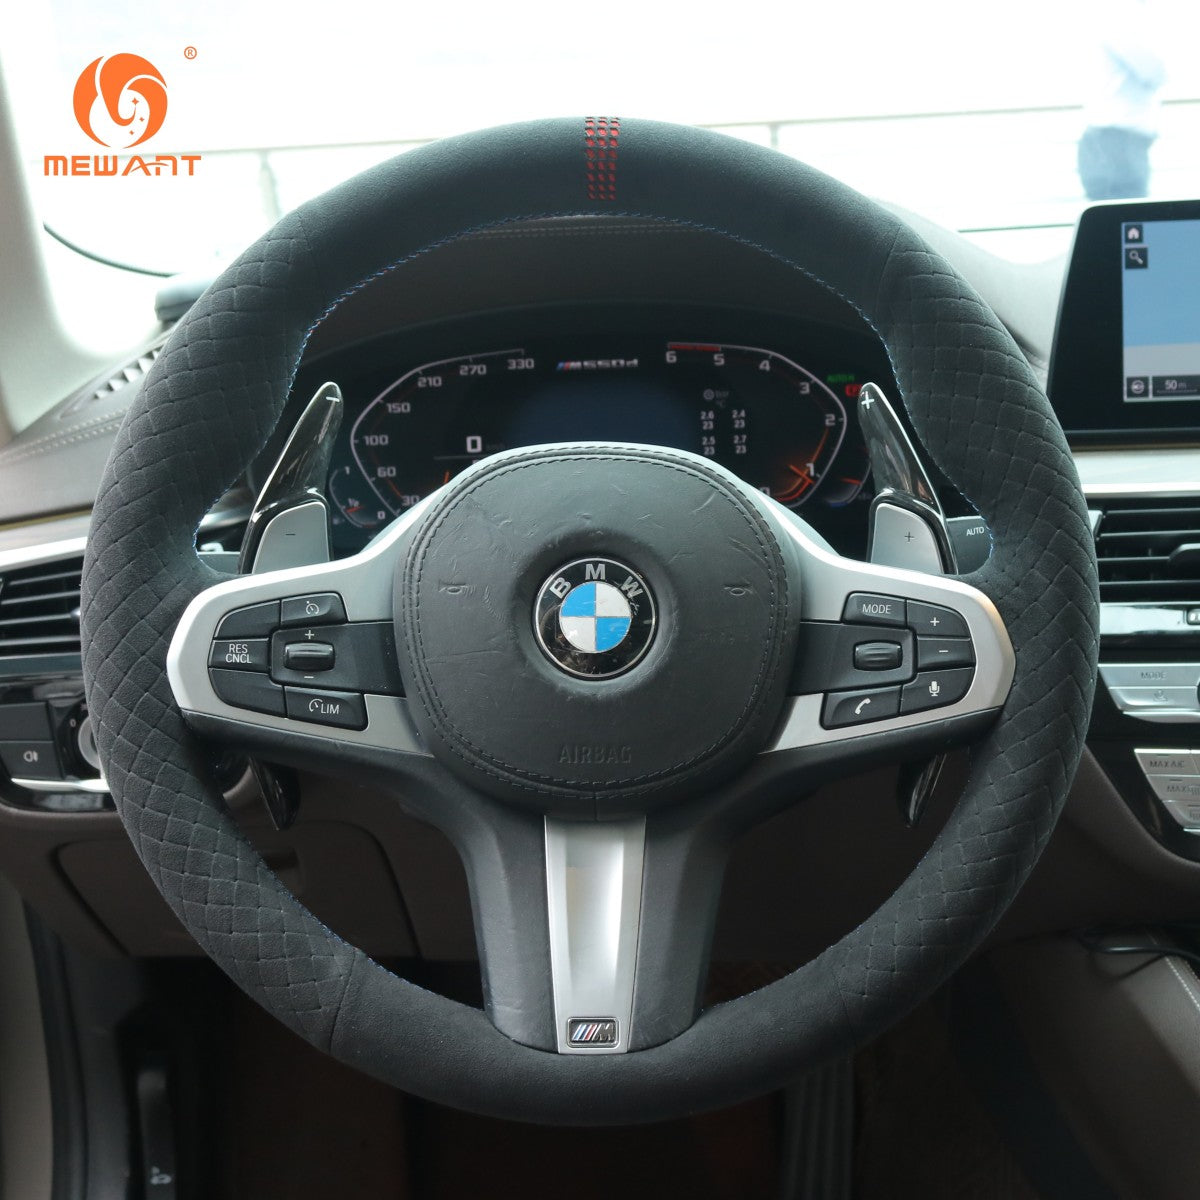 Mewant Aluminum Alloy Carbon Fiber Steering Wheel Shift Paddle for BMW 2 Series F44/F45/F46 /3  Series G20/G21 /4  Series G22/G23 /5 Series G30/G31 /6  Series G32 /7 Series G11/G12 /8  Series G14/G15/G16 /X3 G01 /X4 G02 /X5 G05 /X6 G06 /X7 G07 /Z4 G29